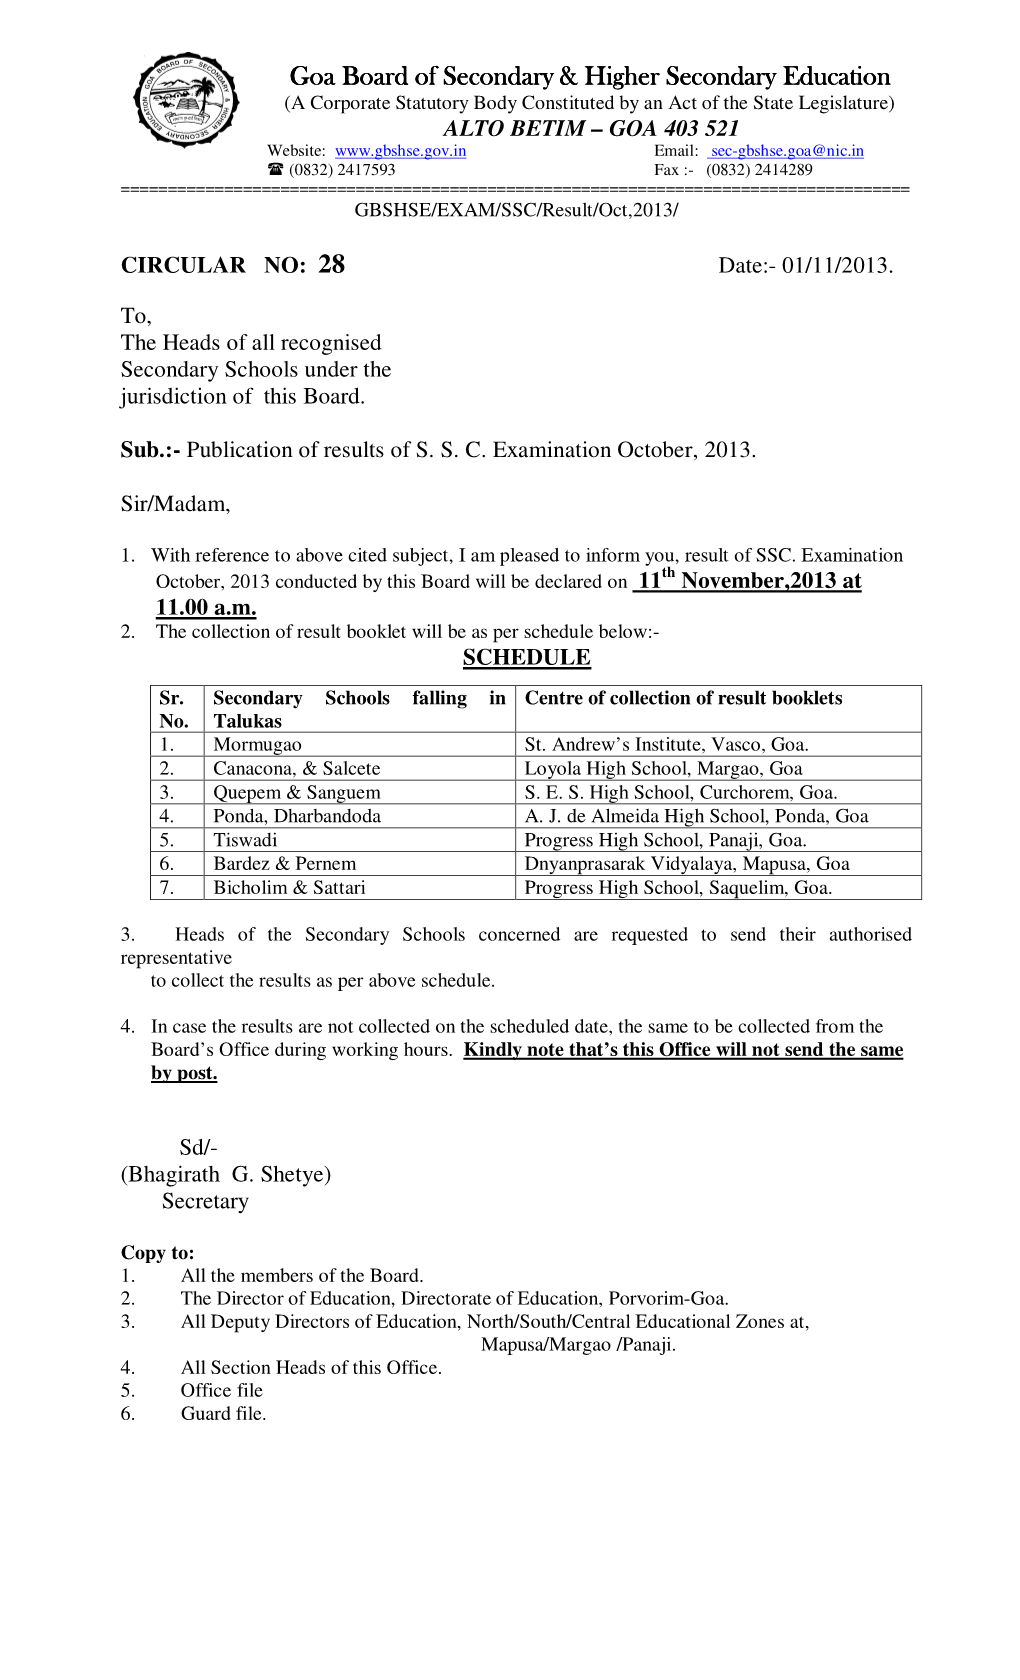 Publication of Results of S.S.C. Examination October